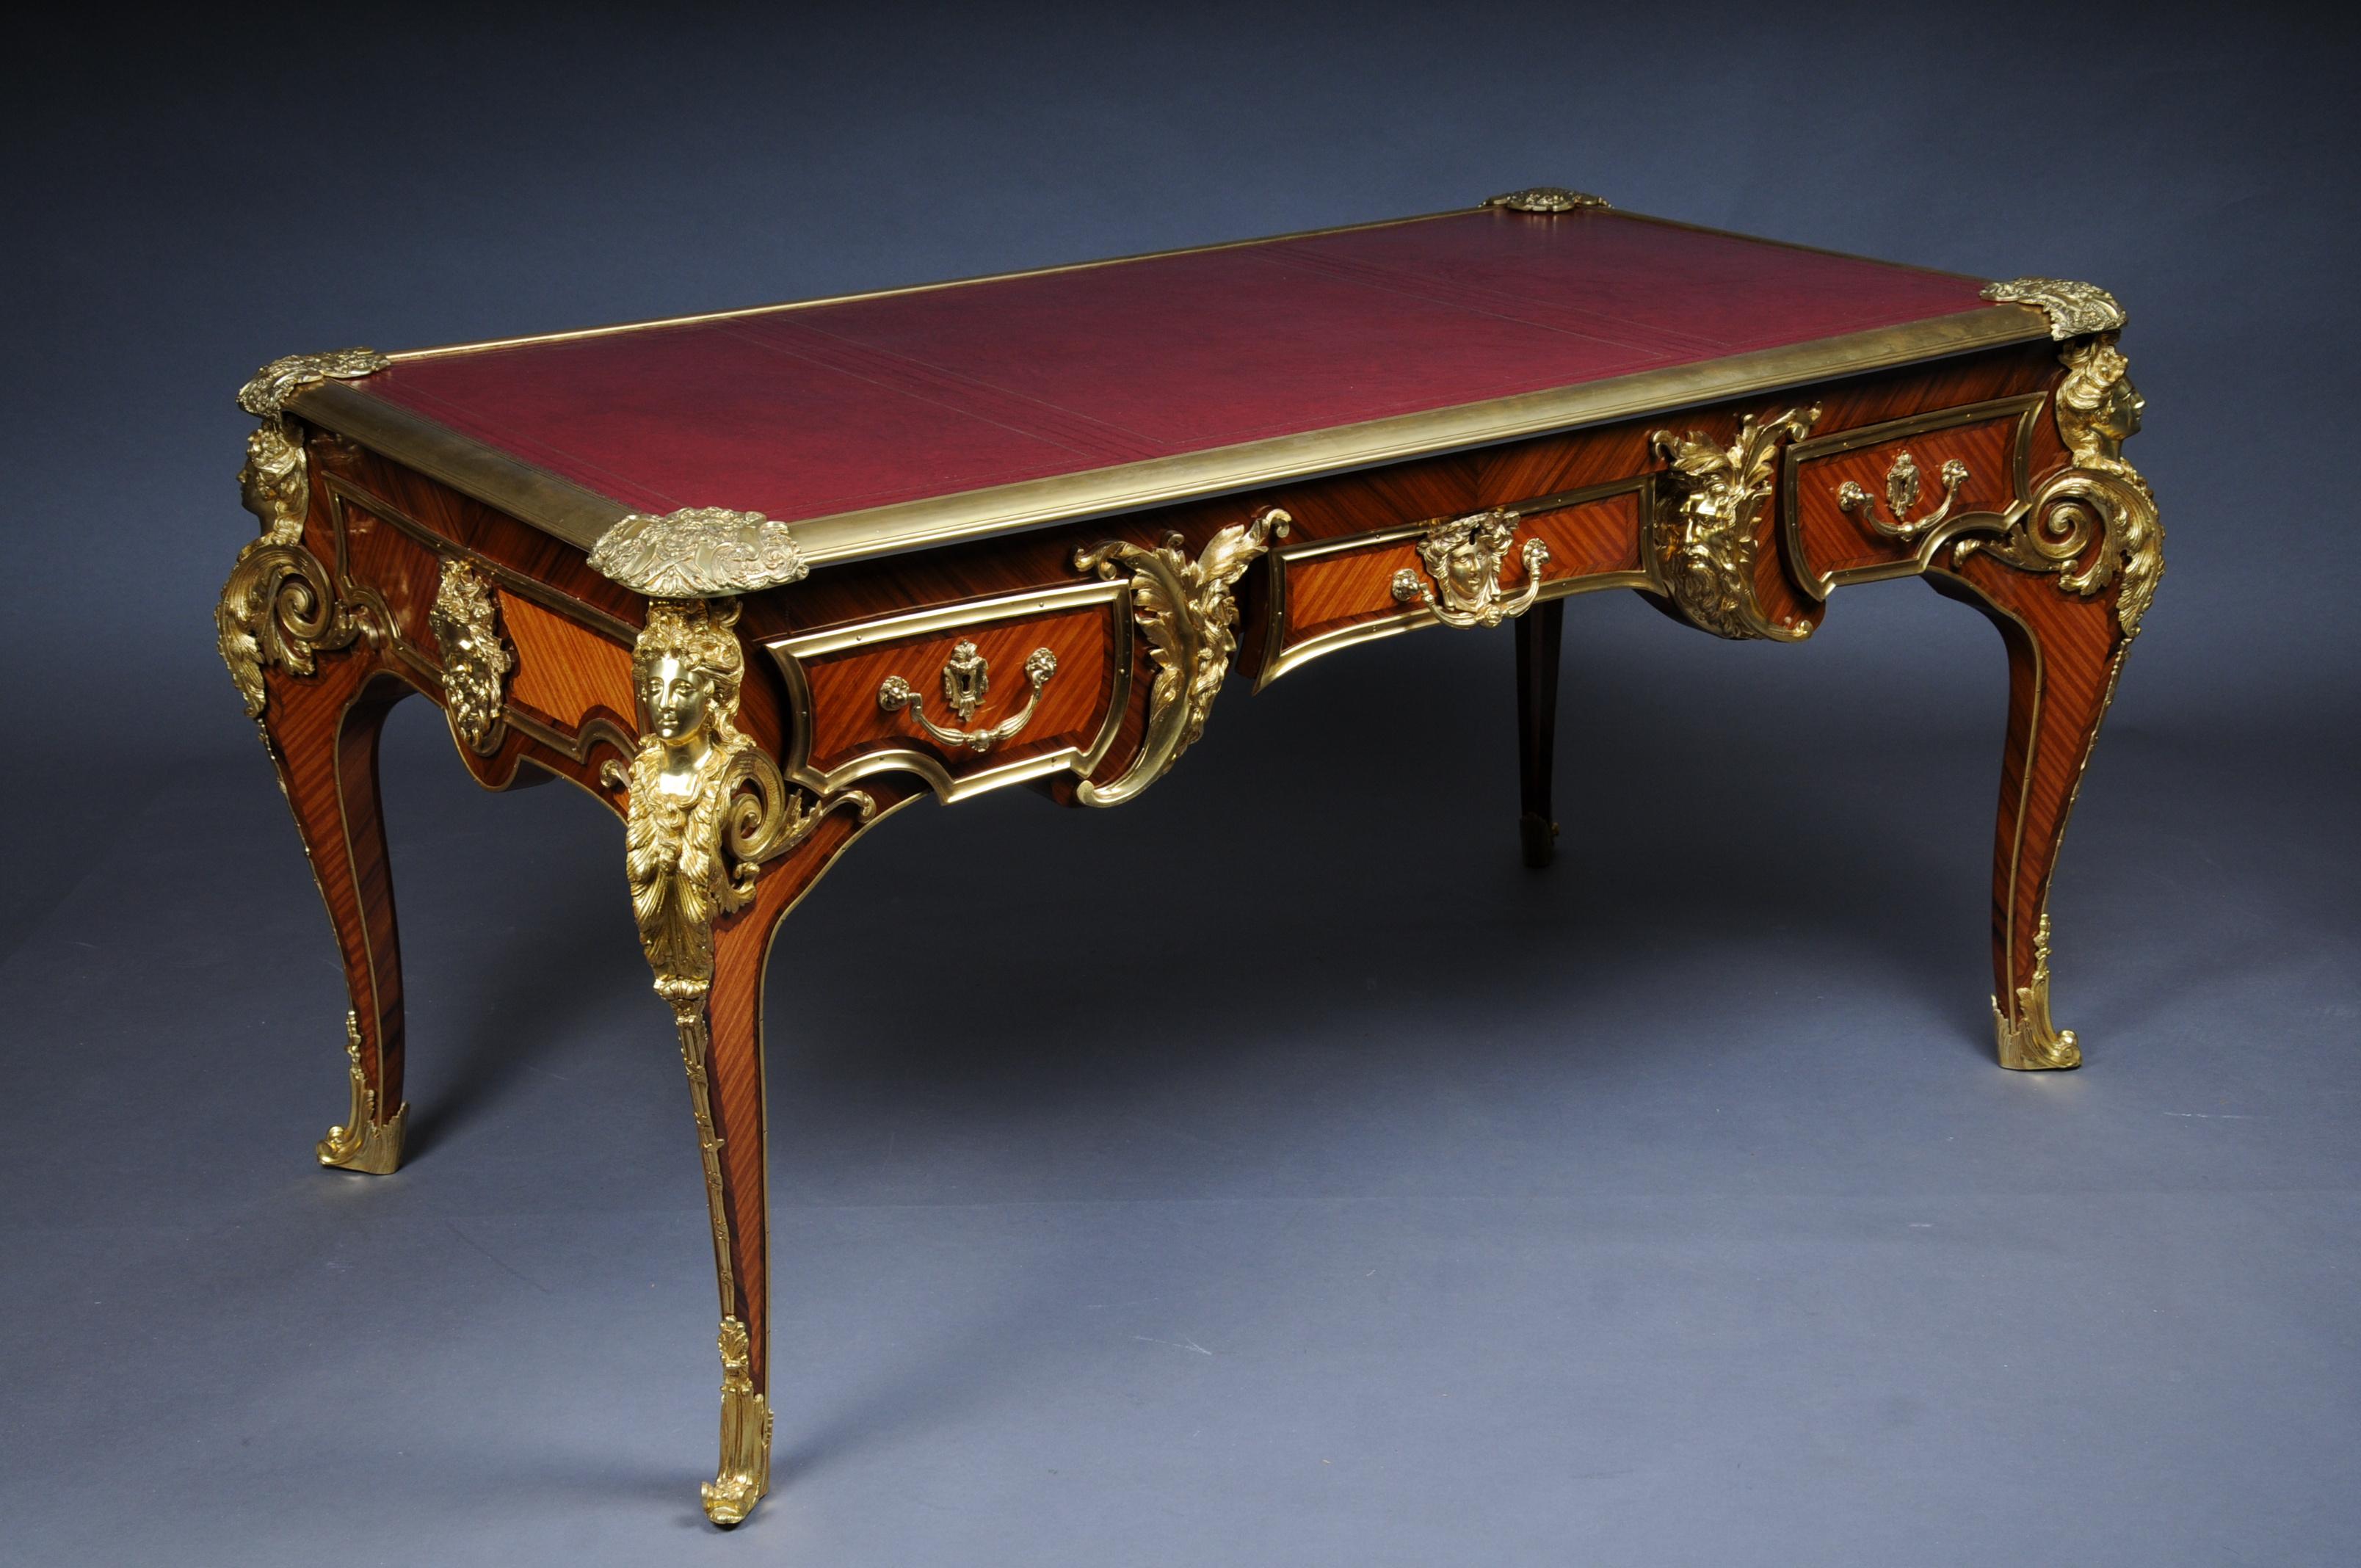 20th Century Bureau Plat or Desk by the Model of Andre Charles Boulle For Sale 1